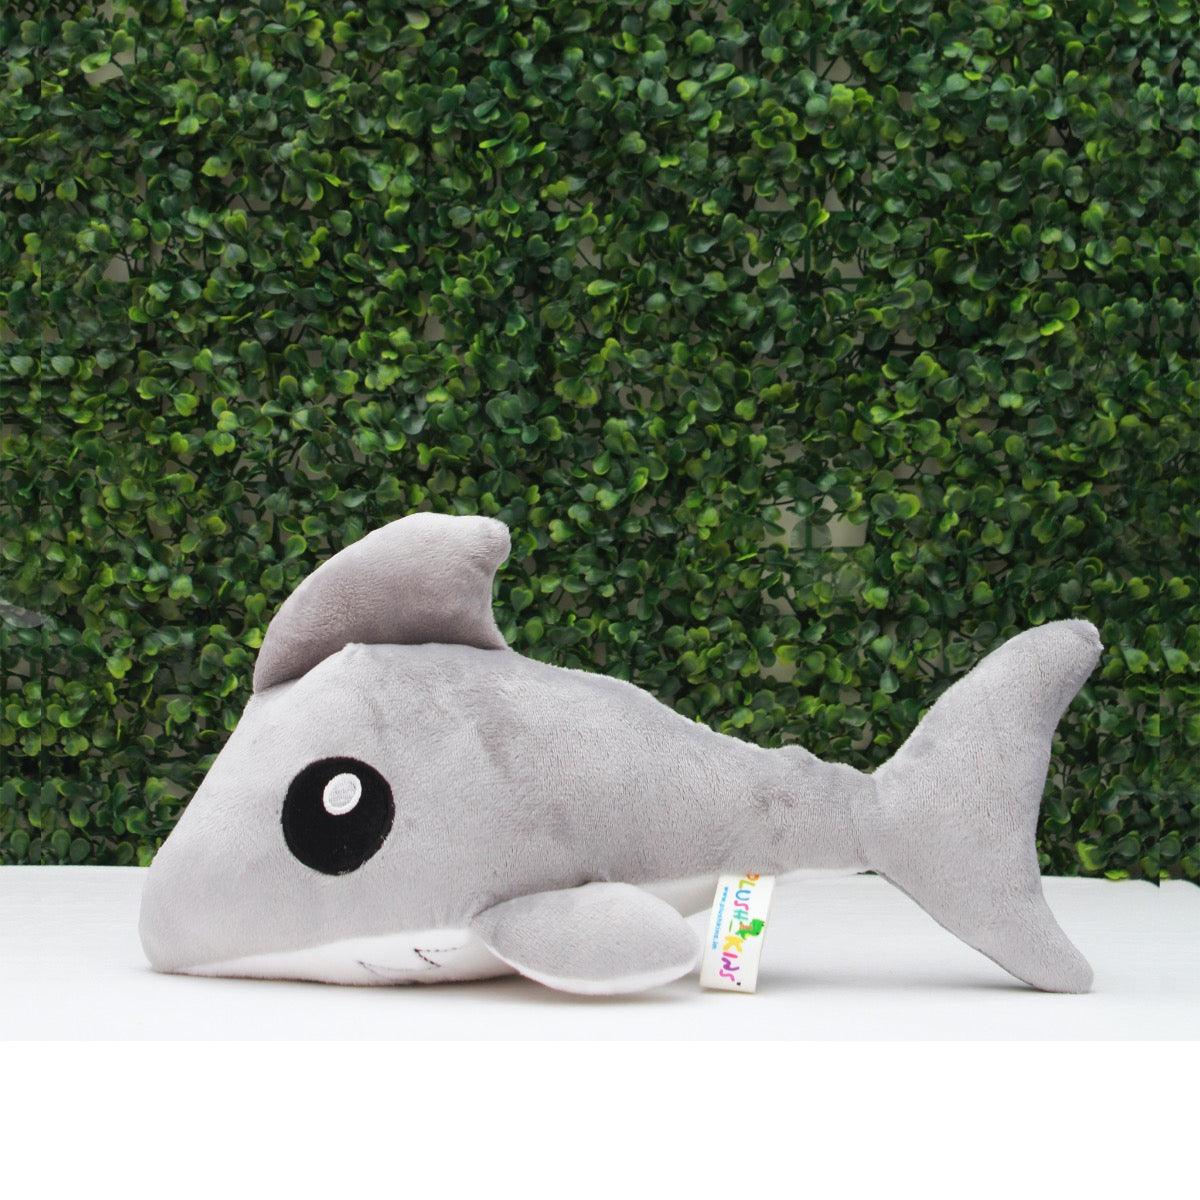 Plushkins Shark, Premium Grey & White Soft Toy for Kids, Aged 1-10 years, Extra Soft Stuffed Toy with Plyfibre Stuffing